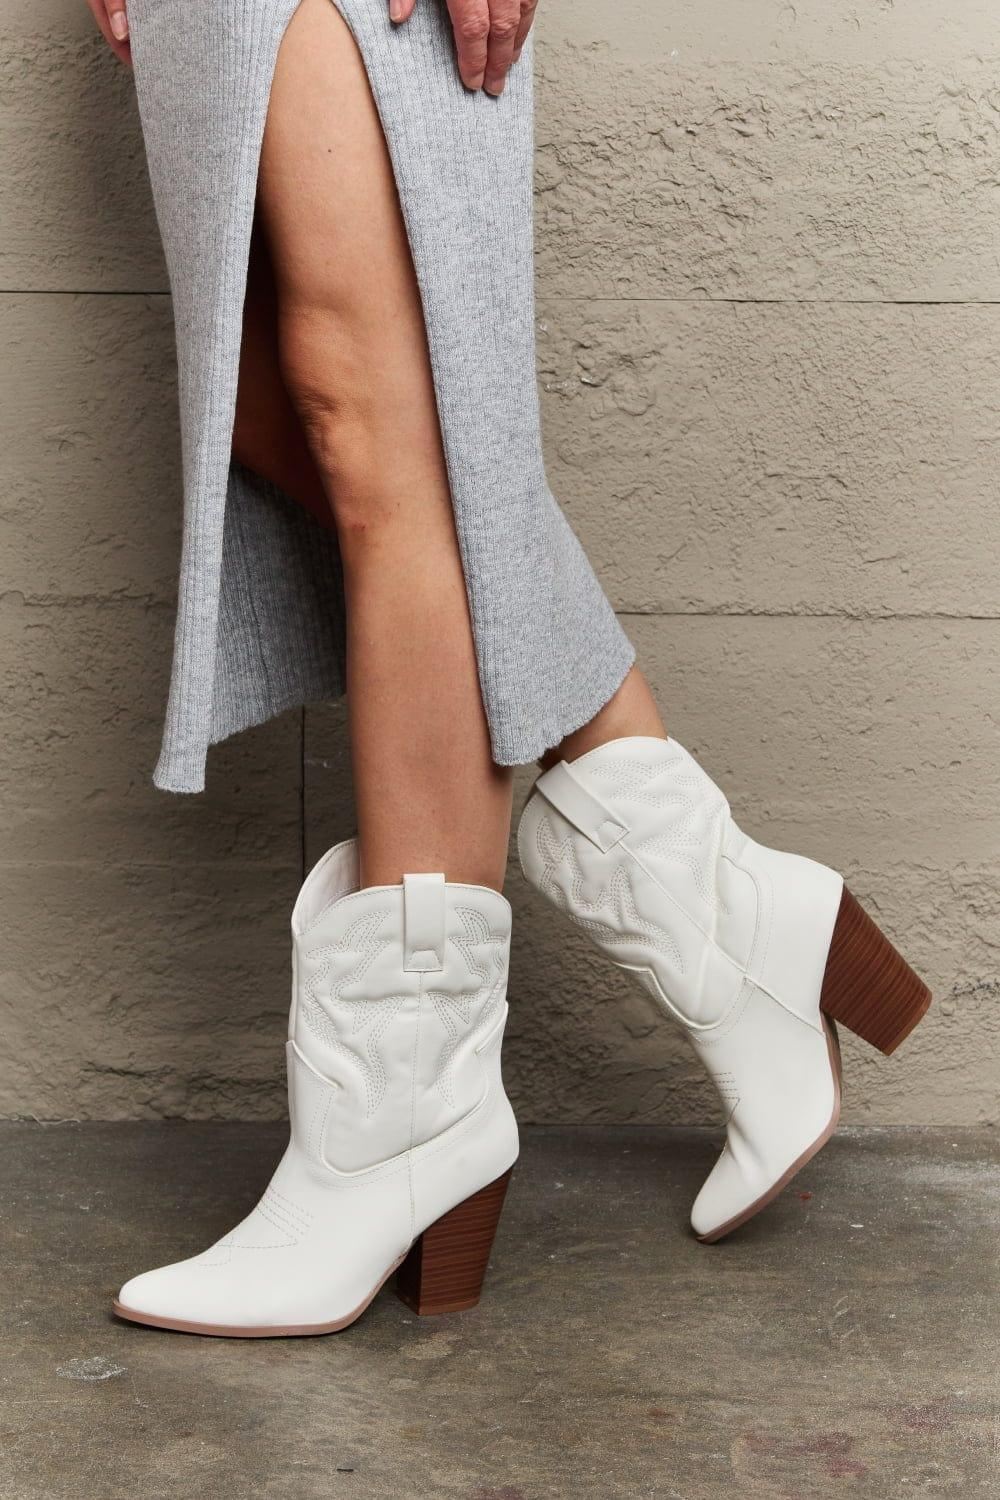 Bella White Cowboy Boots - Inspired Eye Boutique